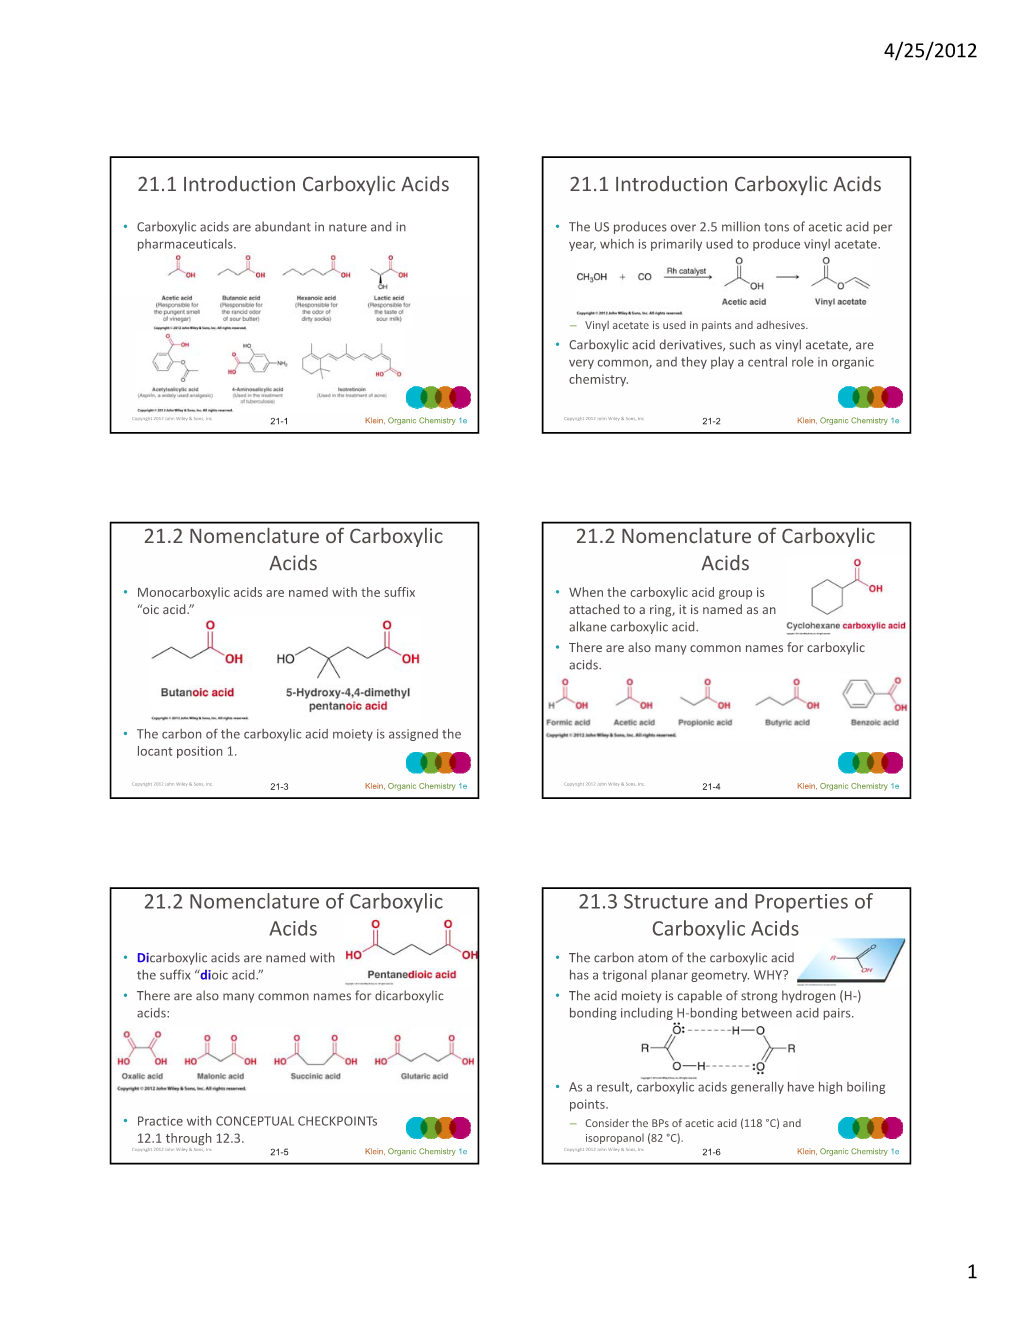 21.1 Introduction Carboxylic Acids 21.1 Introduction Carboxylic Acids